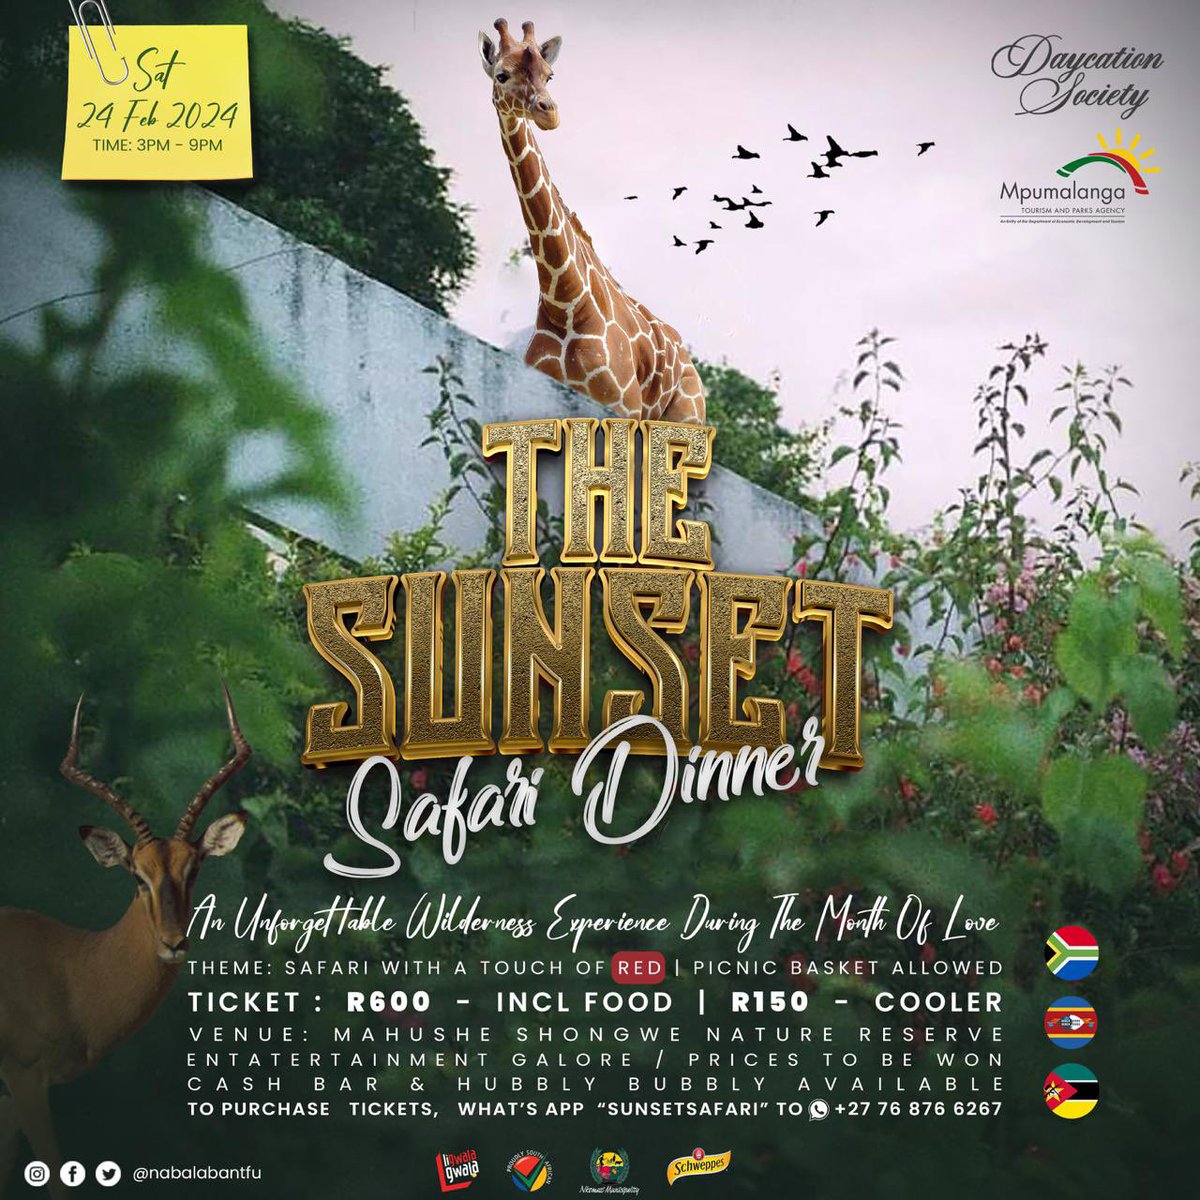 The Daycation Society in association with MTPA and Ligwalagwala FM present ….

“The Sunset Safari Dinner - Month of love edition”

#DiscoverMpumalanga #LFM #LoveRocks #NkomaziTourism
#TheNabaWay